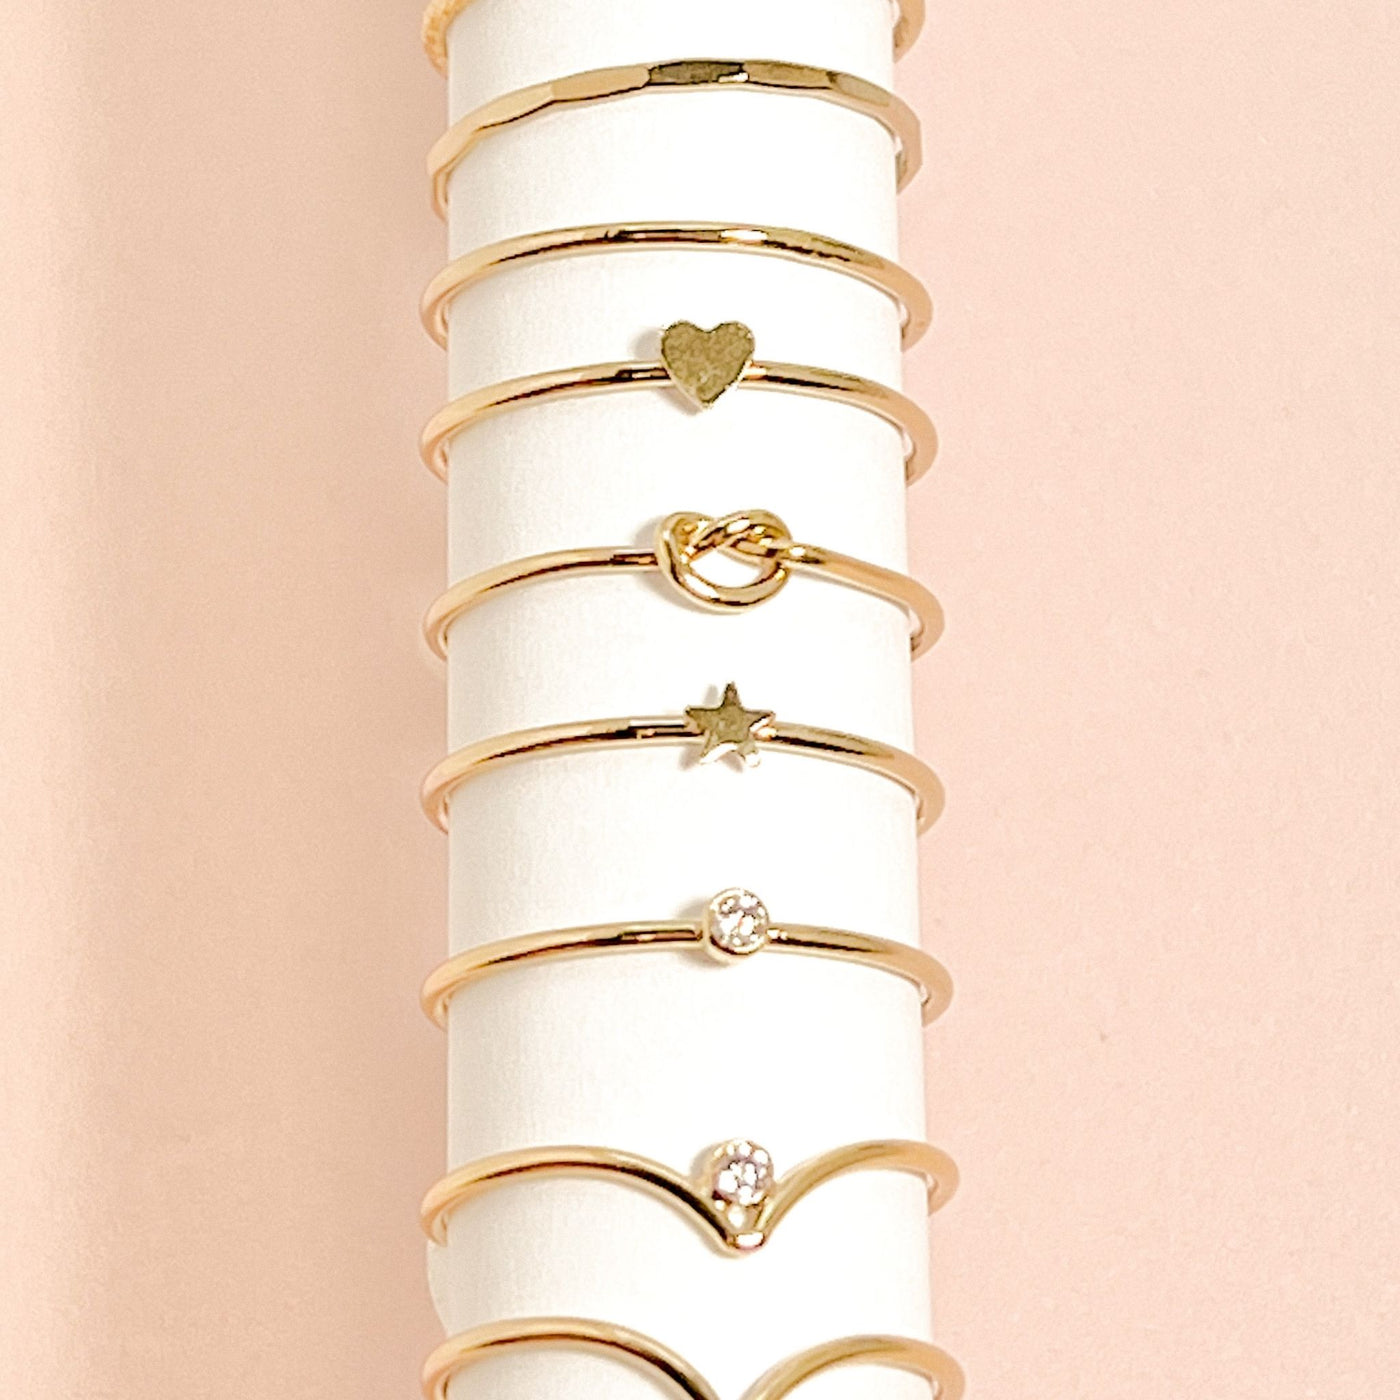 assortment of differing minimalist 14k gold filled stacking rings on a roll of white paper with a pink background